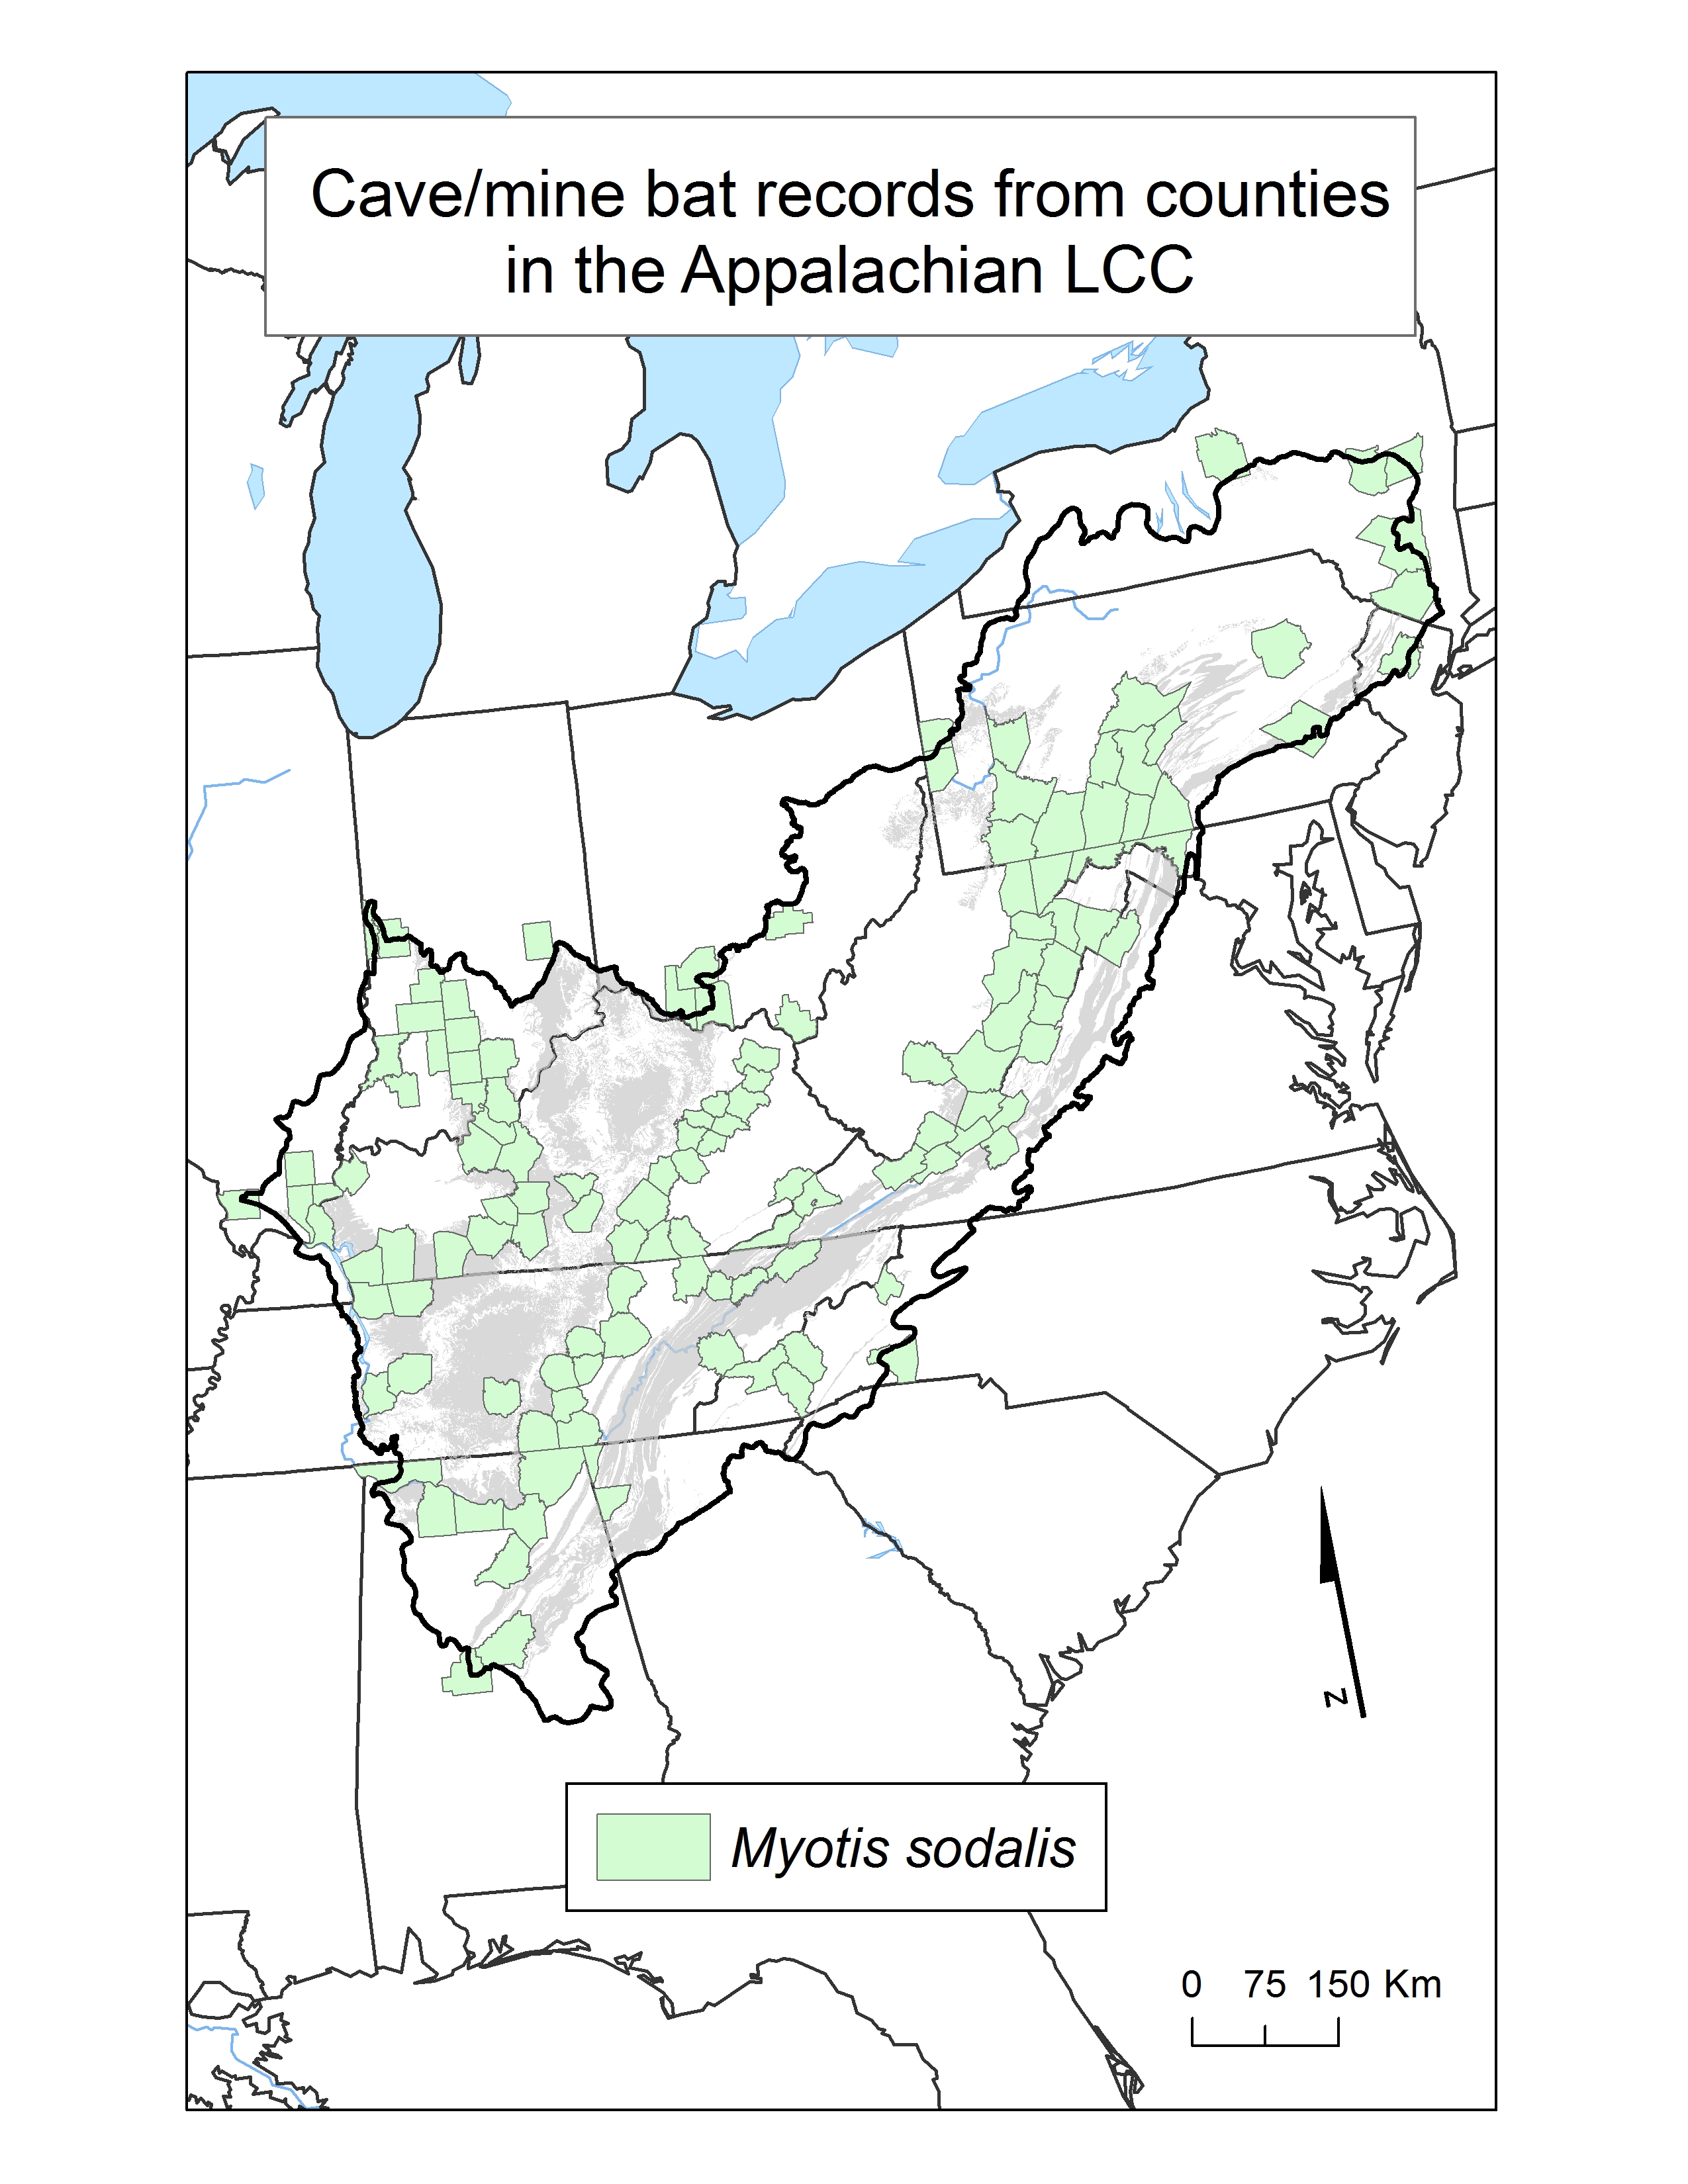 County Occurrence Map for Indiana Bat